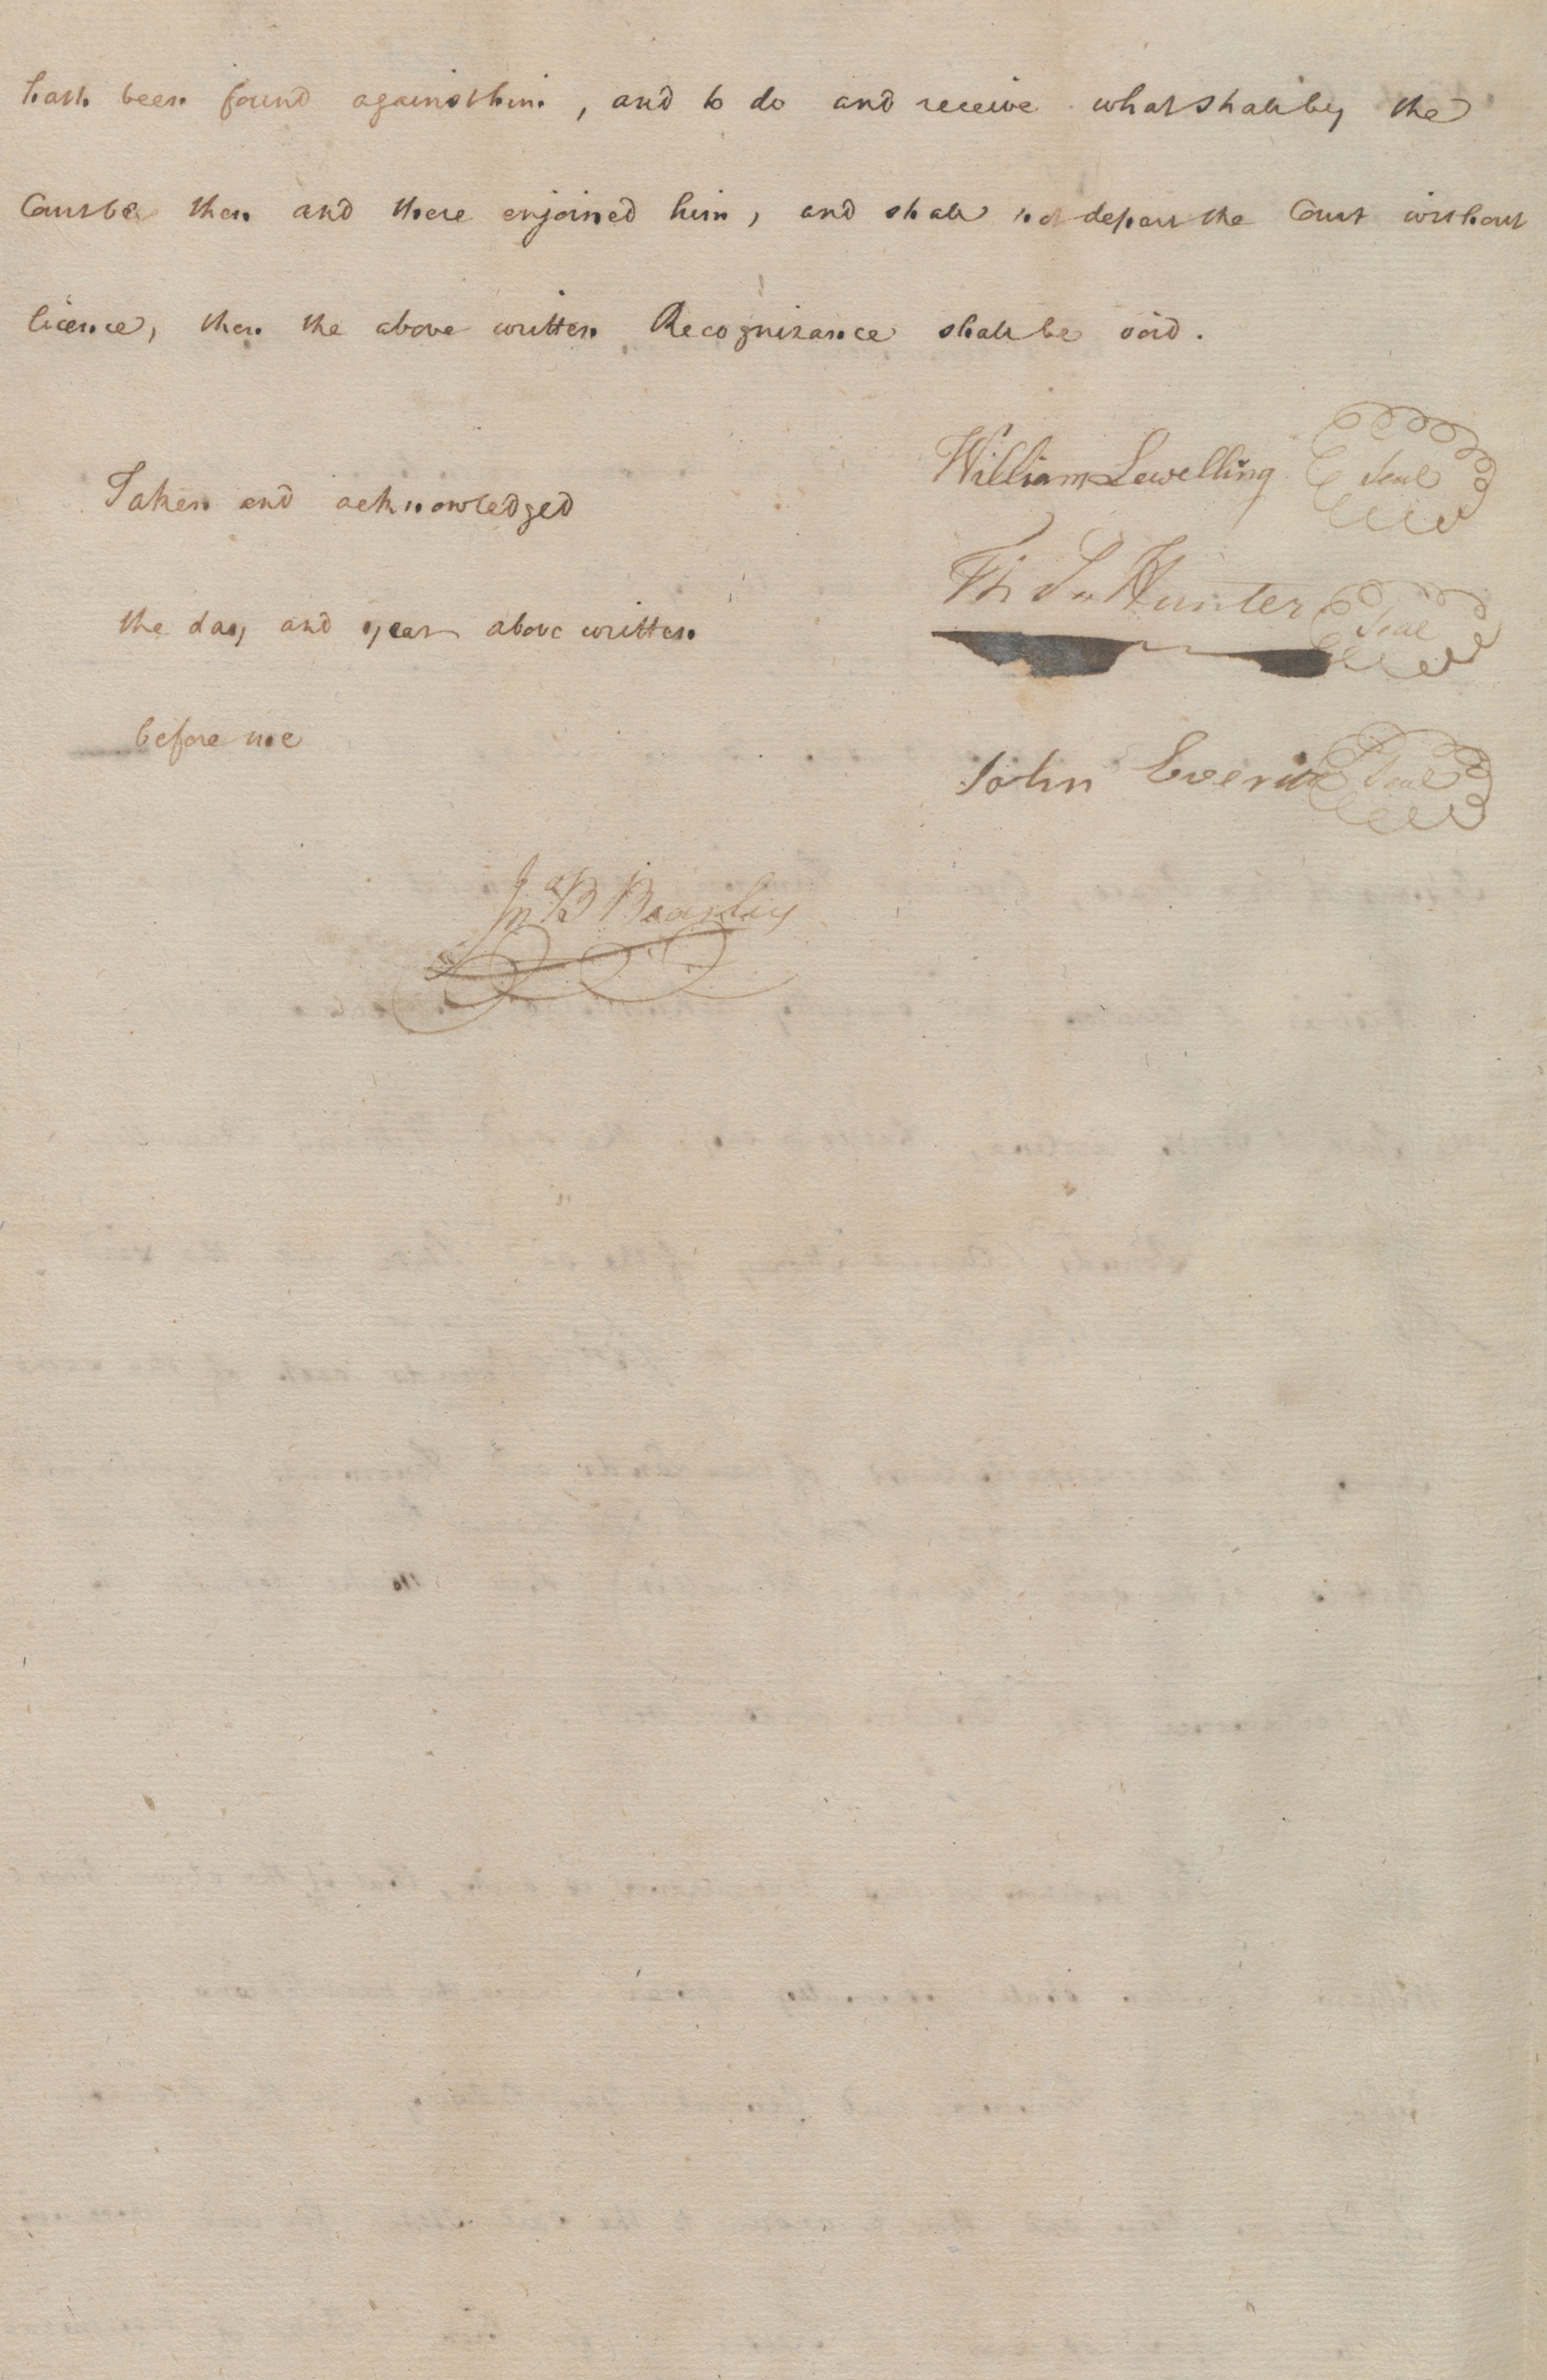 Bond from the Edenton District Court for William Lewellen, 10 October 1777, page 2